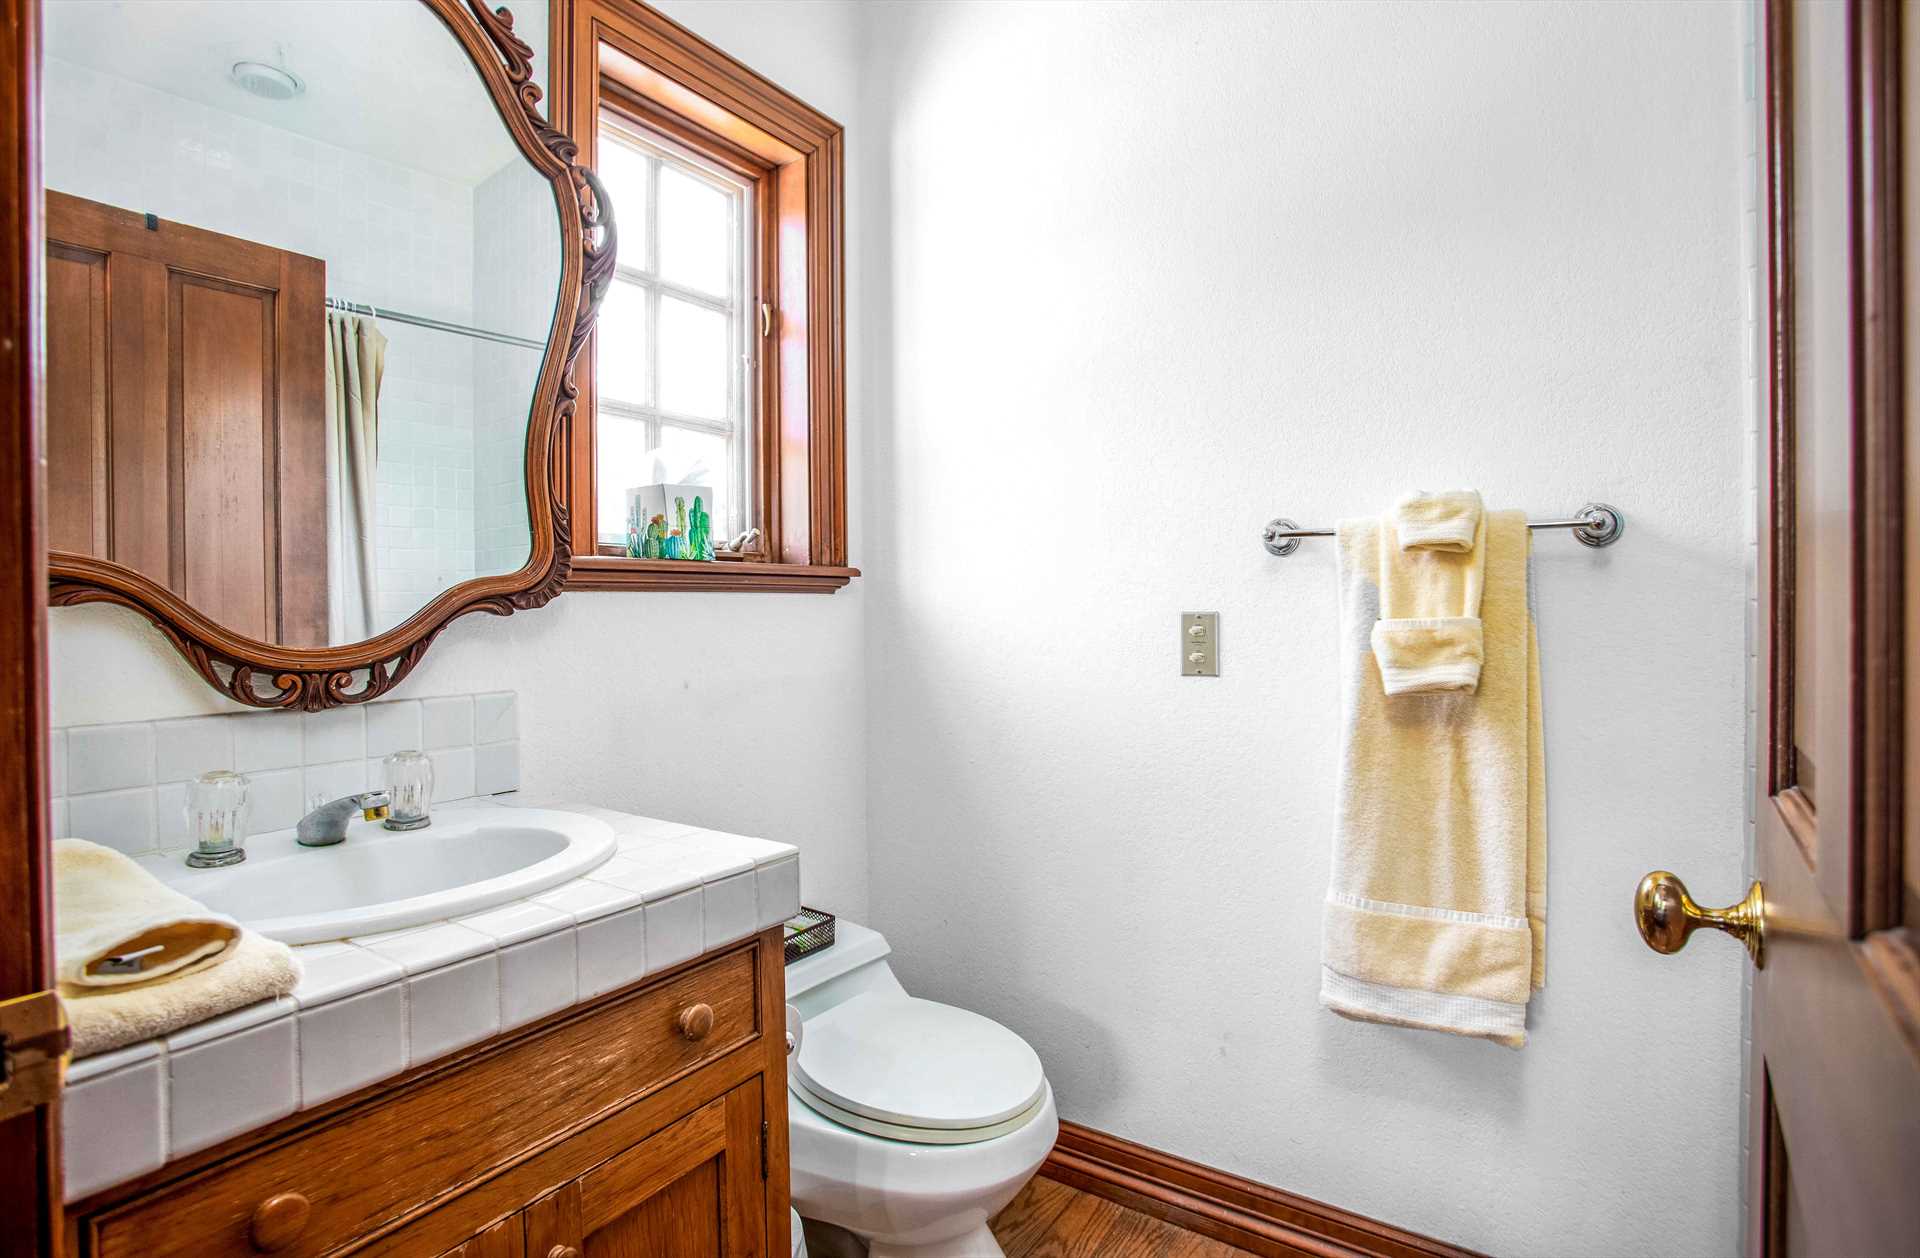                                                 A tub and shower combo, along with clean linens, round out your cleanup space in the Casita's full bath.